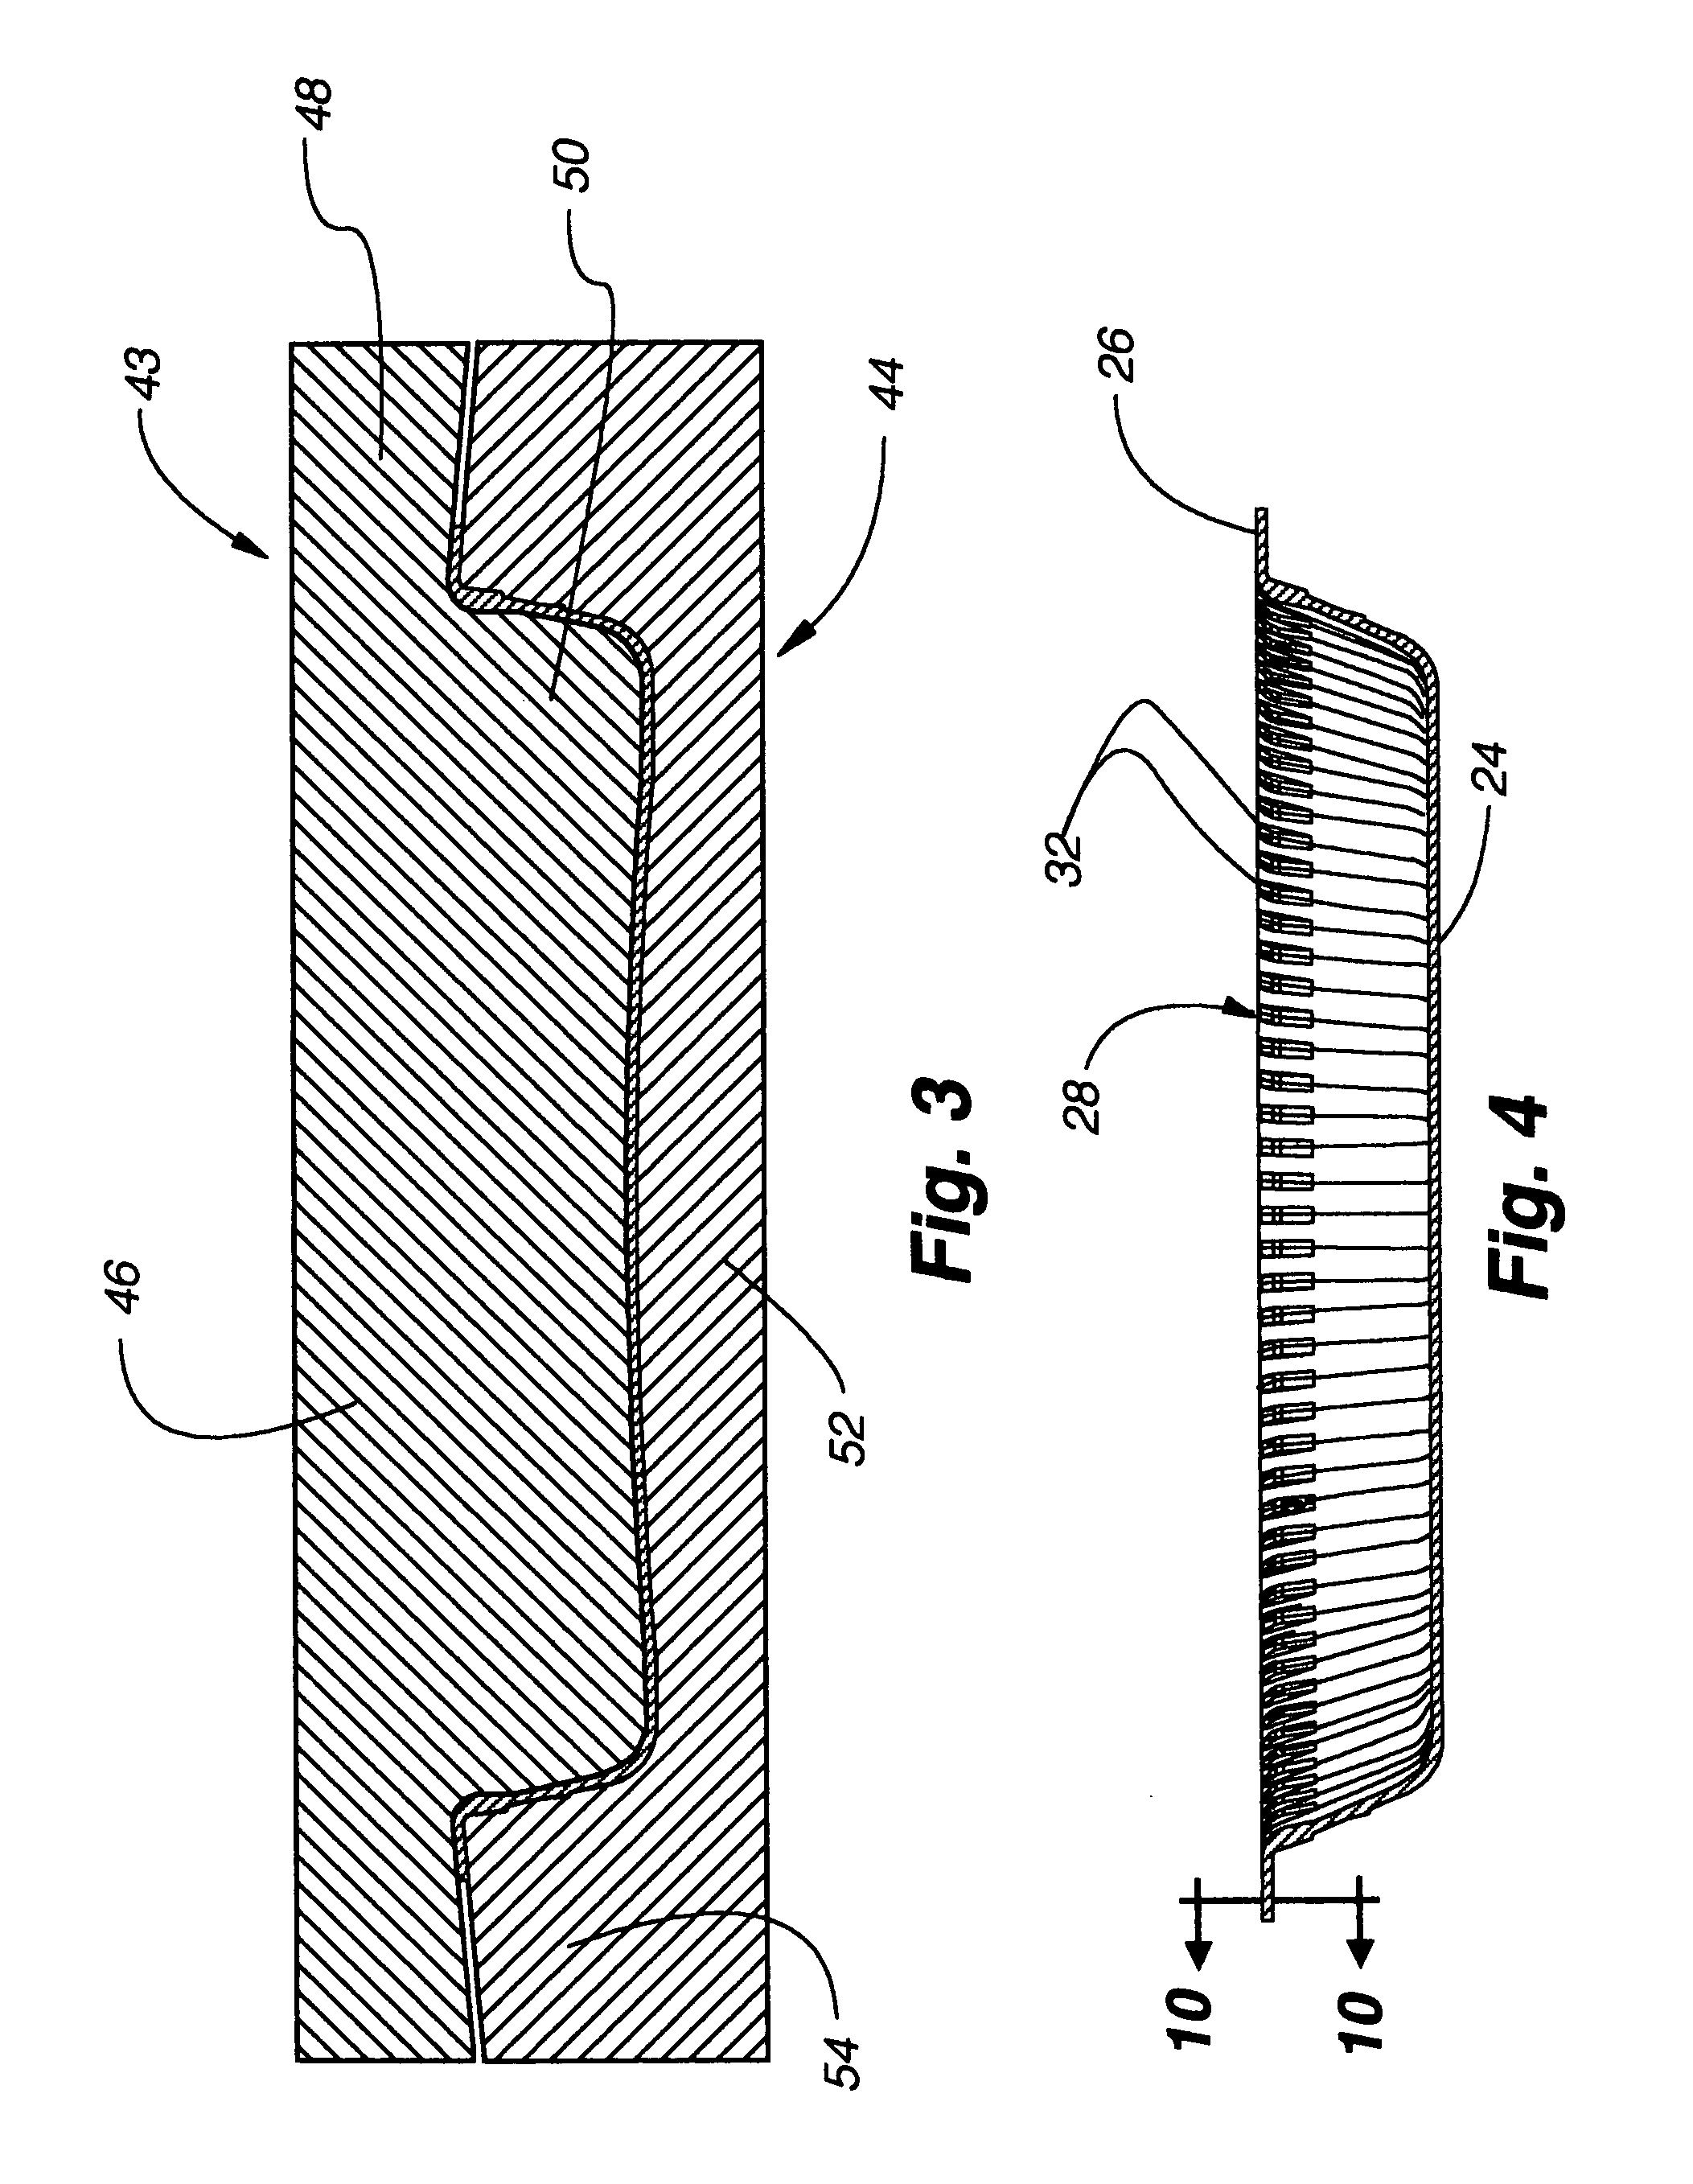 Container with improved stacking/denesting capability